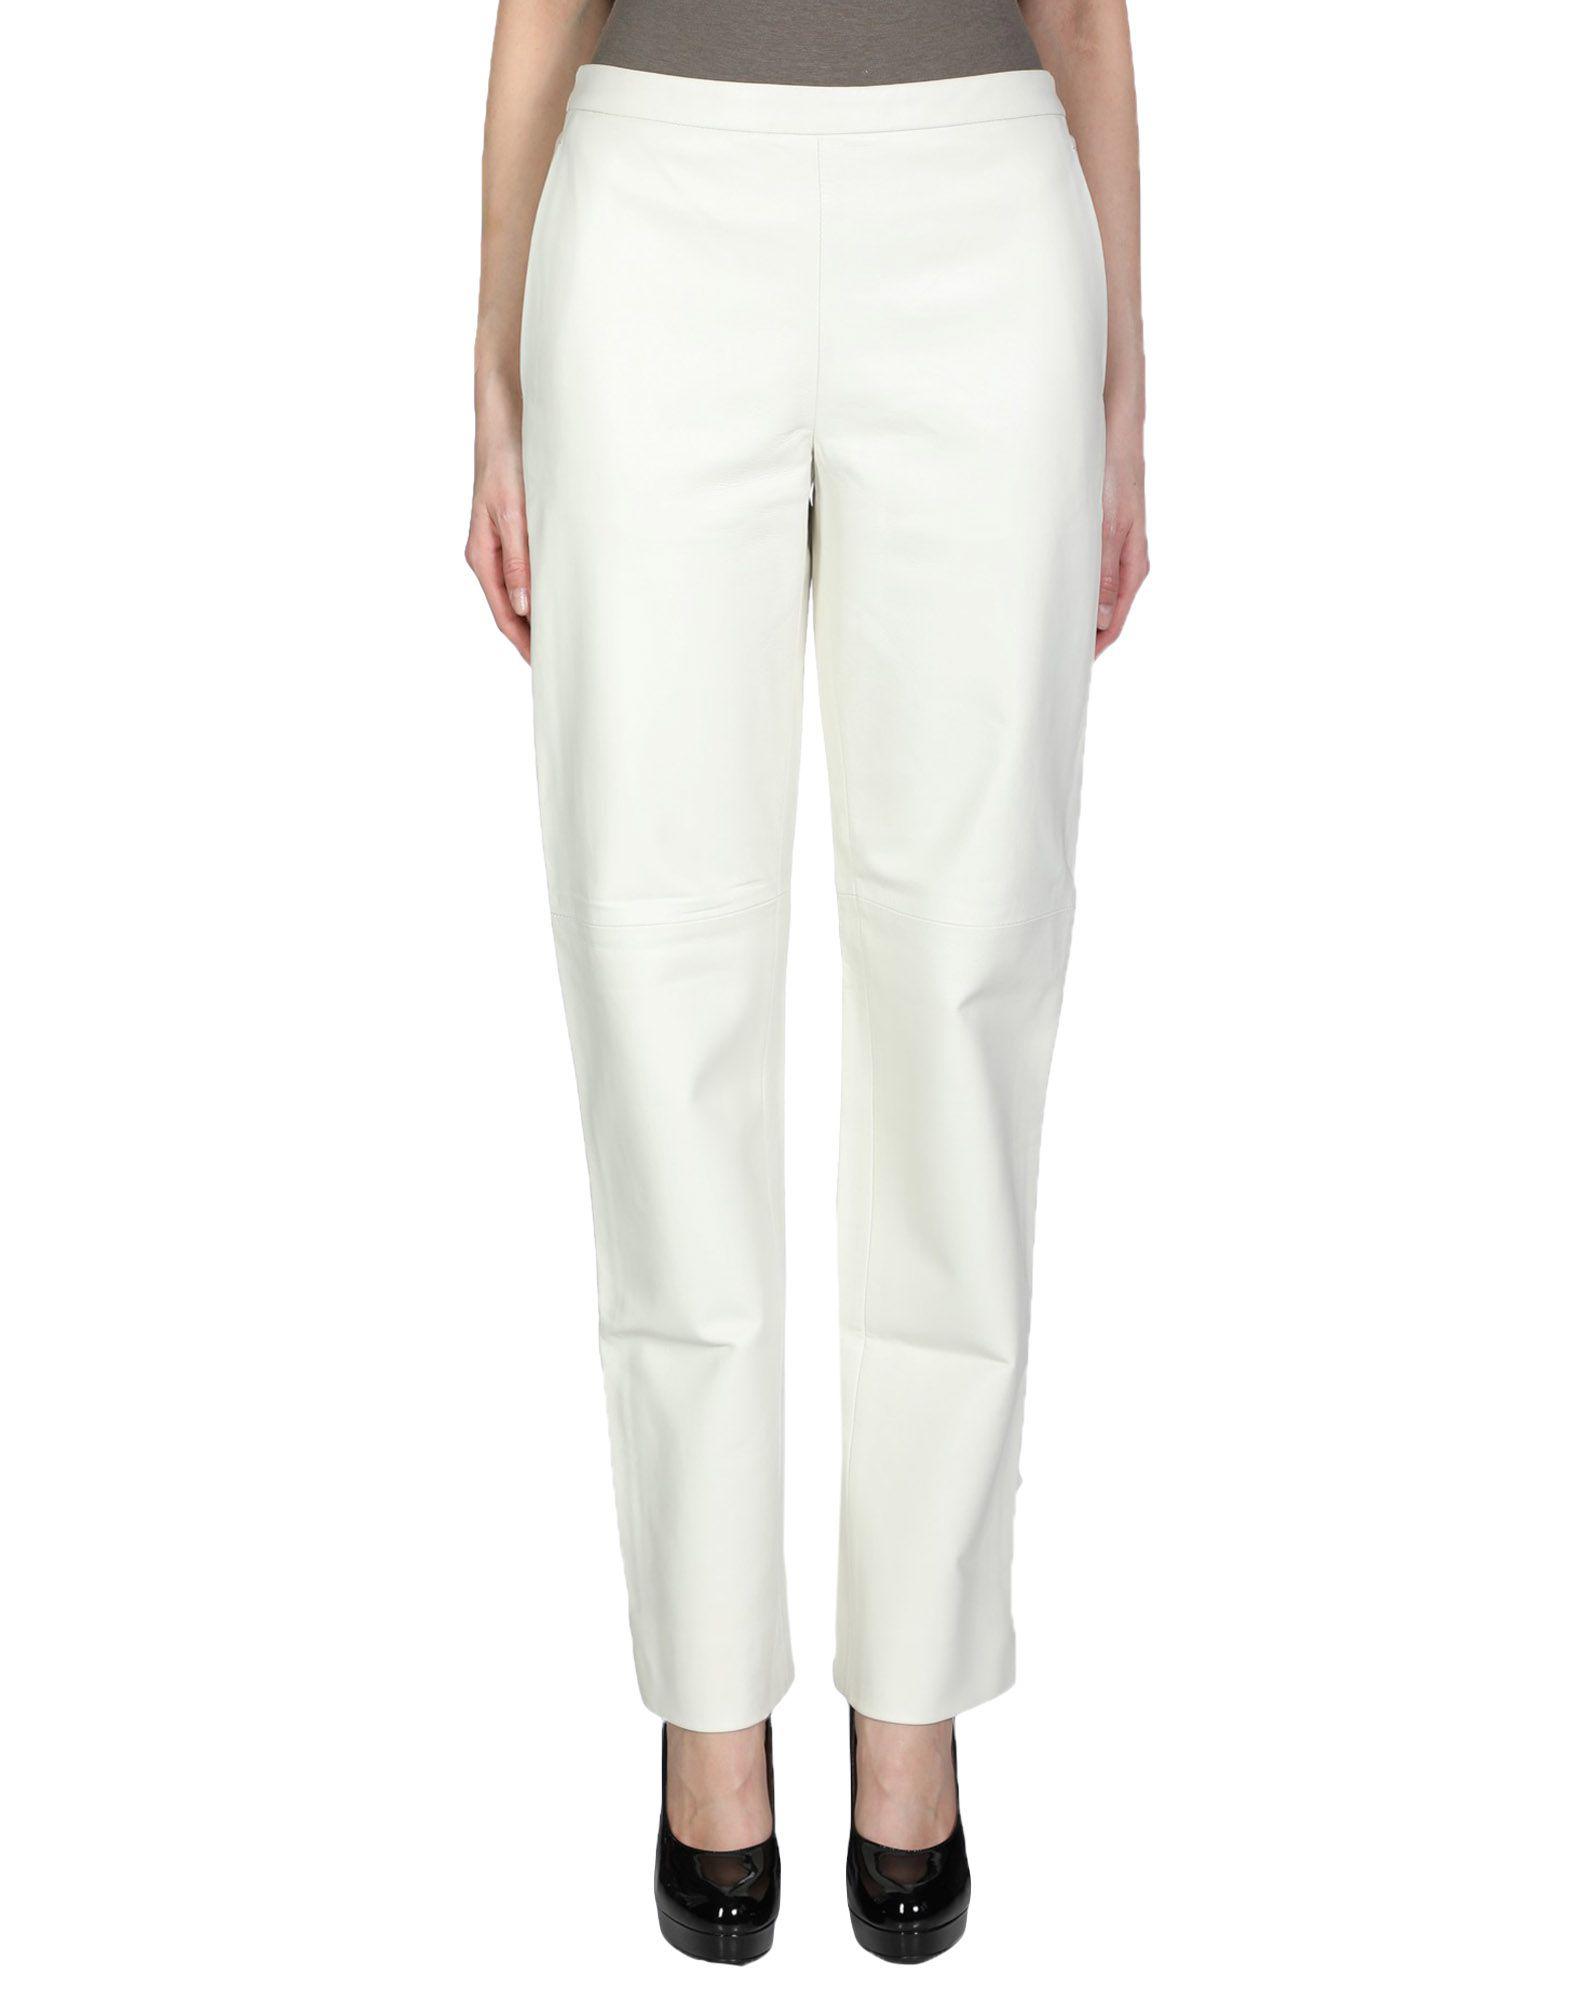 Maison Margiela Wool Casual Pants in Ivory (White) - Lyst